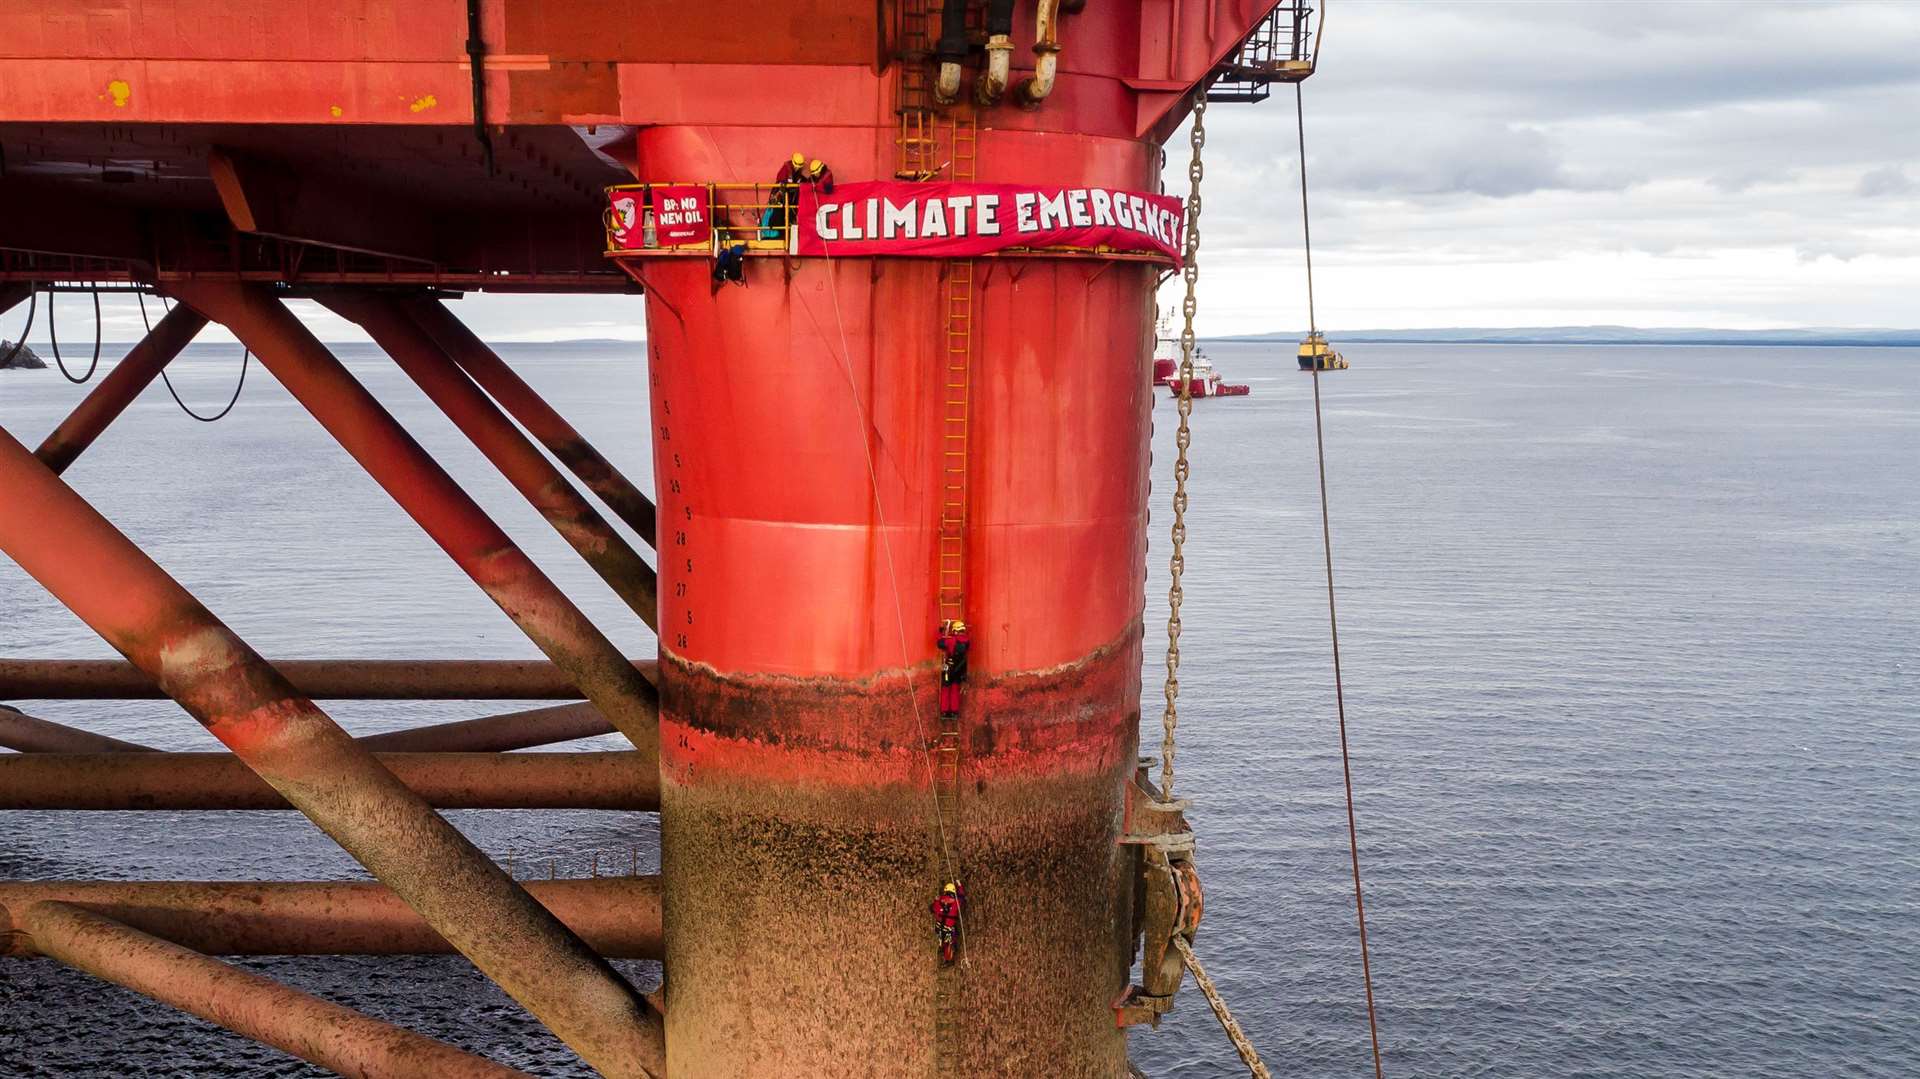 Protesters in the Cromarty Firth boarded a BP oil rig during 2019. Picture: Greenpeace